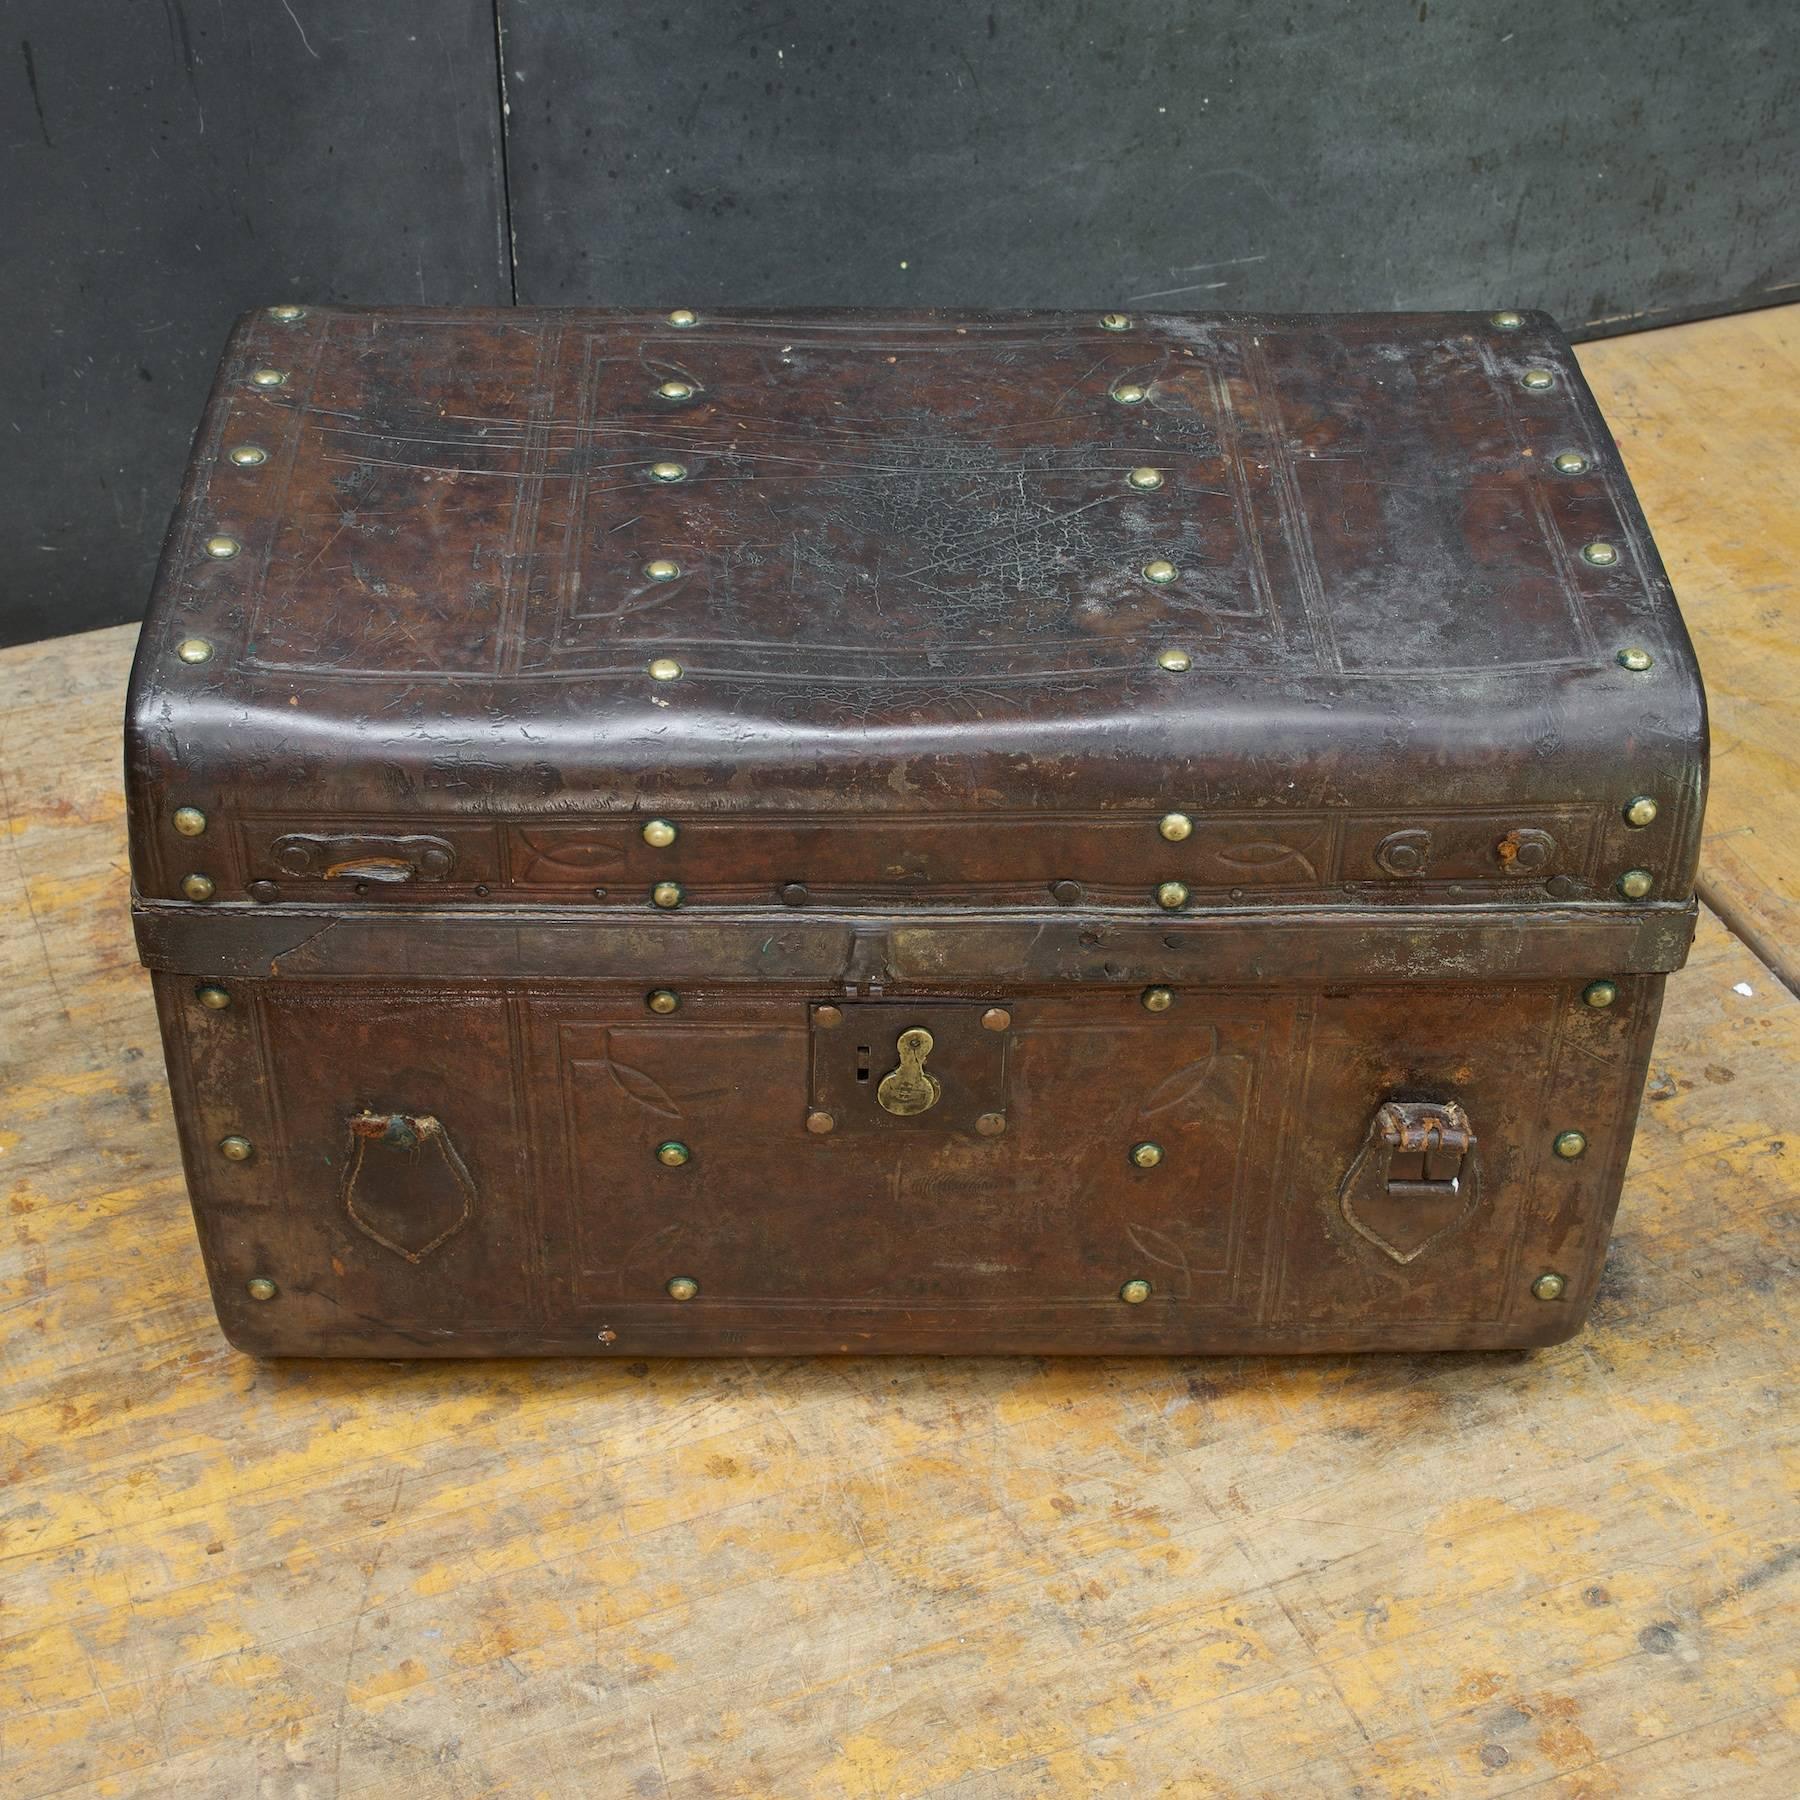 Beautifully Preserved HEAVY Leather Early 1900s Automobile Rear Rumble Box. Because of the shape, heft, and the construction this Trunk is believed to be a leather clad  Rumblebox, not steamer Luggage. Maker unknown, Lock marked VR.  Missing Front